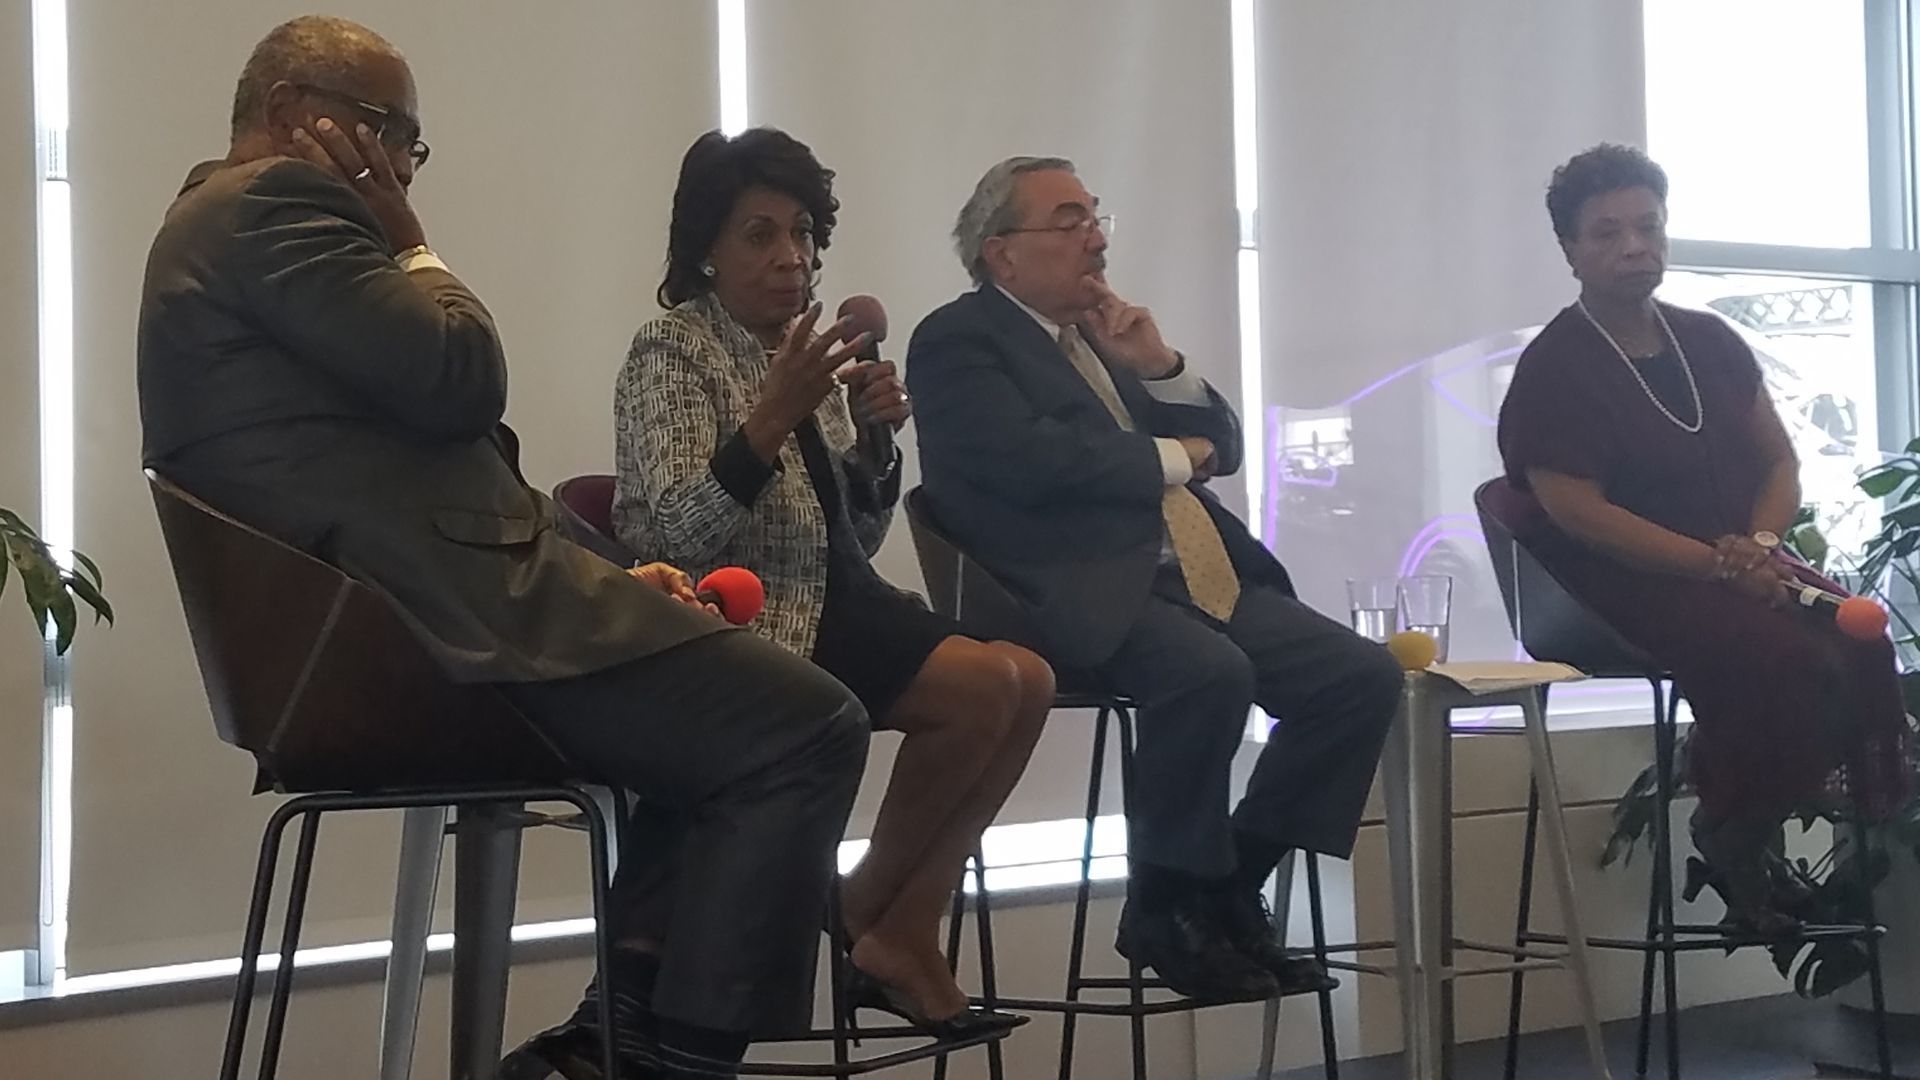 Reps. Meeks, Waters, Butterfield, and Lee at Lyft HQ.